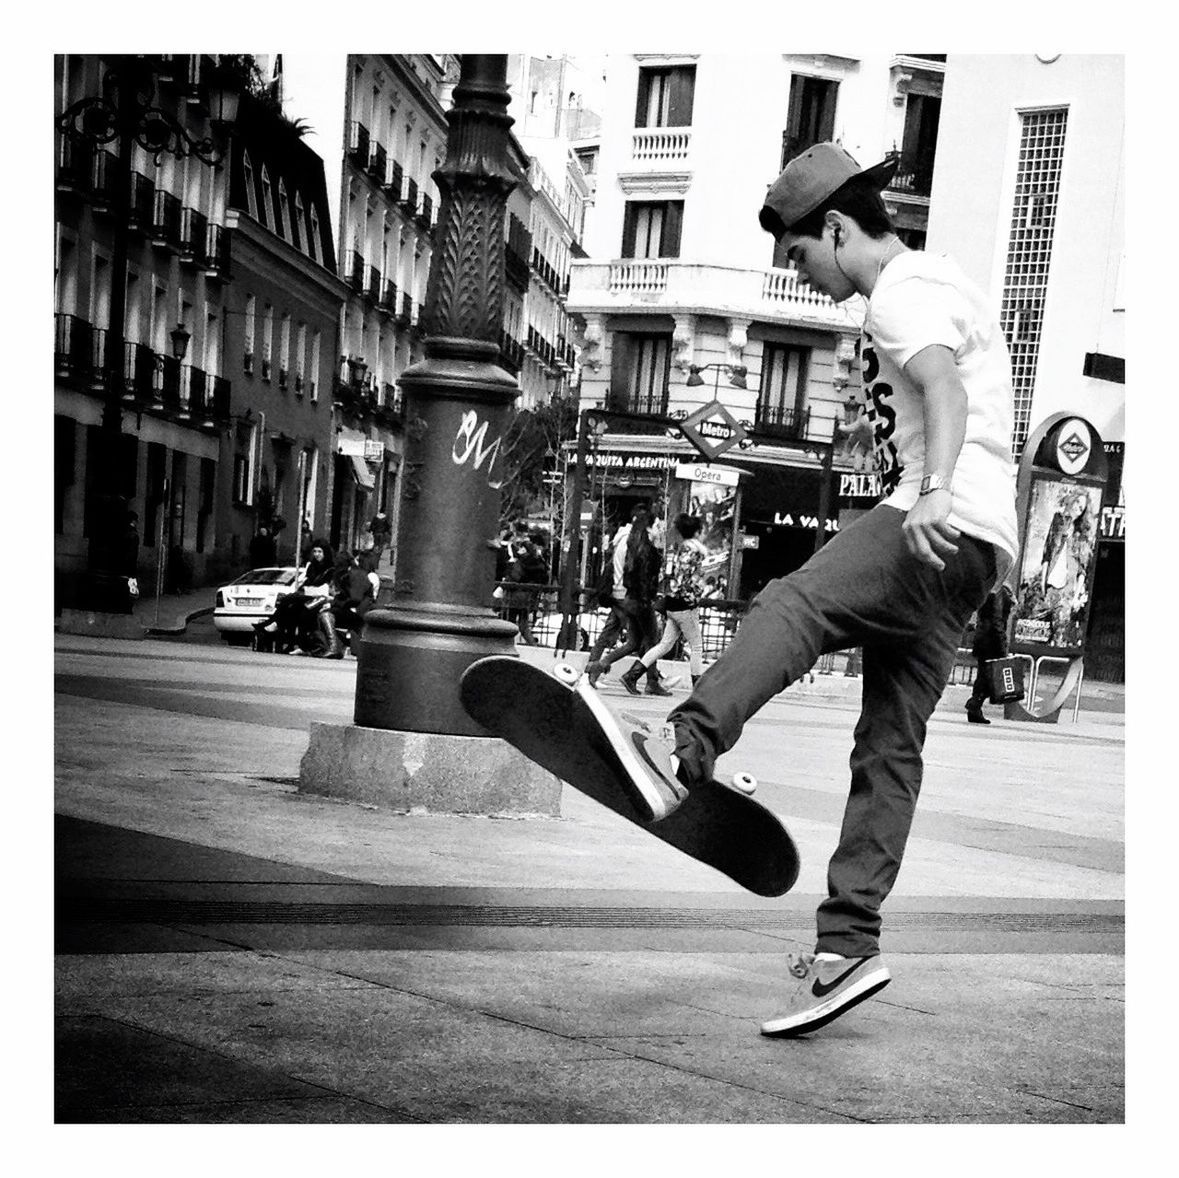 full length, transfer print, lifestyles, building exterior, auto post production filter, leisure activity, architecture, street, built structure, casual clothing, childhood, city, person, mid-air, playing, jumping, city life, young adult